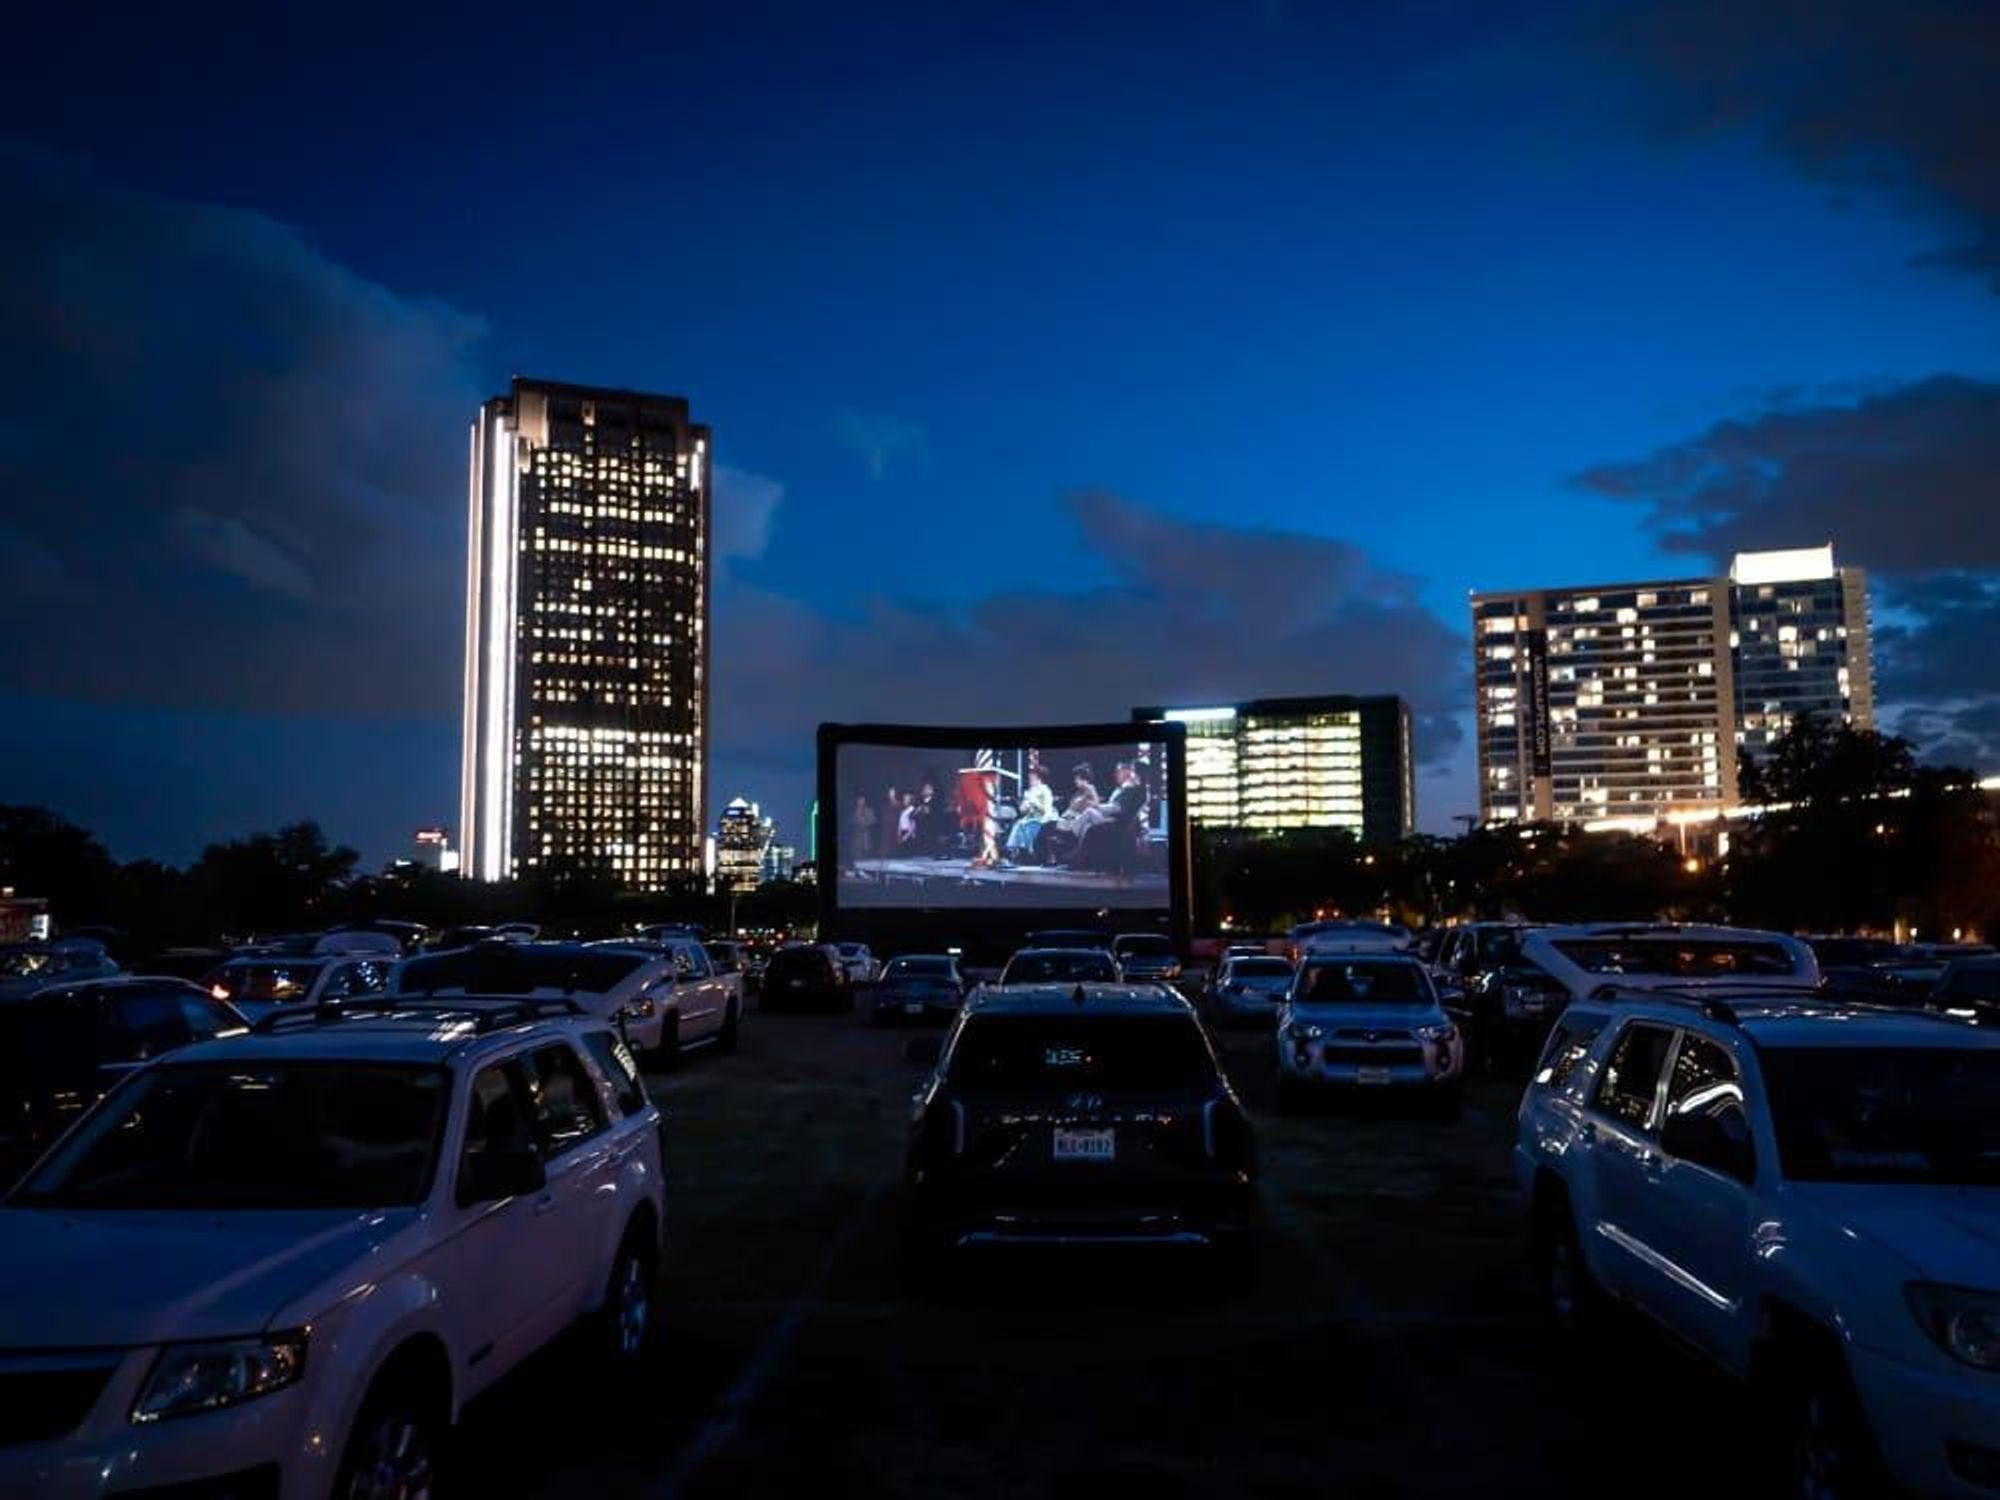 Rooftop Cinema Club: The Drive-In at The Central